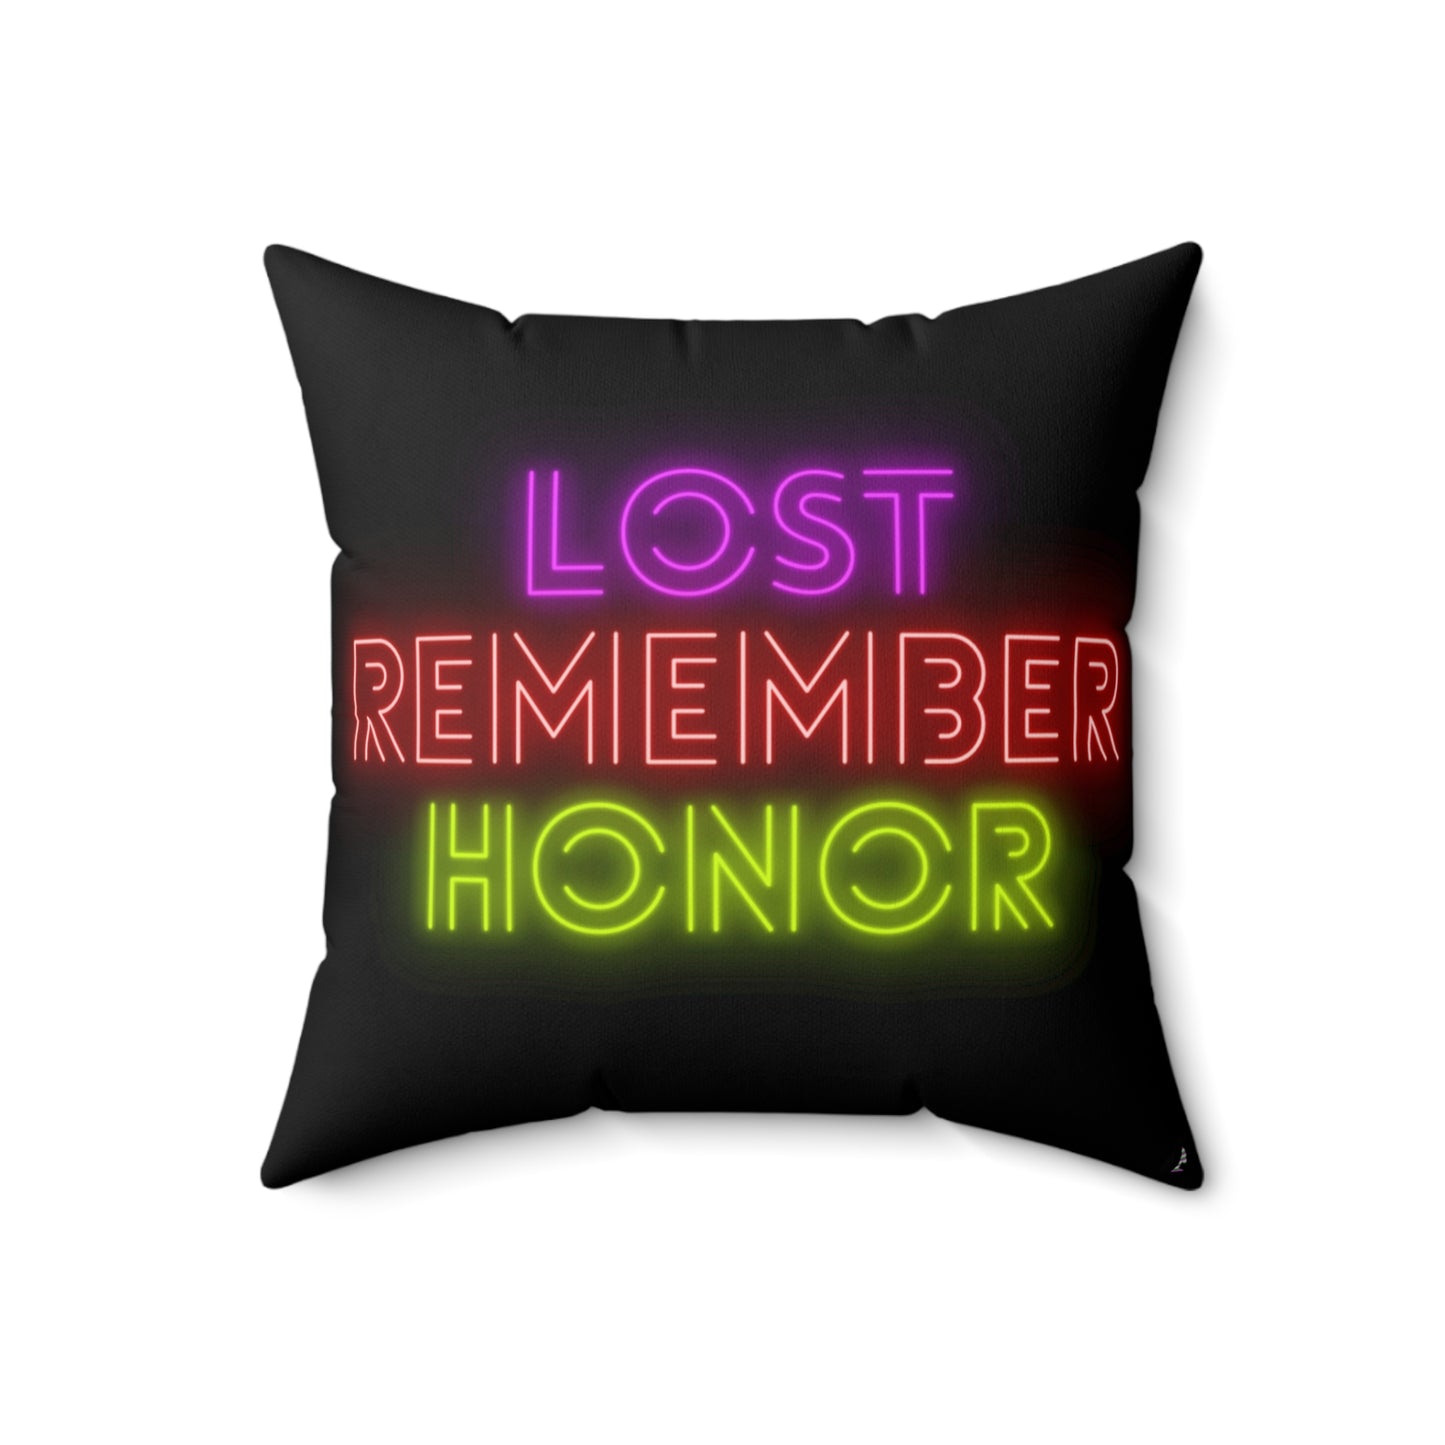 Spun Polyester Square Pillow: Fight Cancer Black